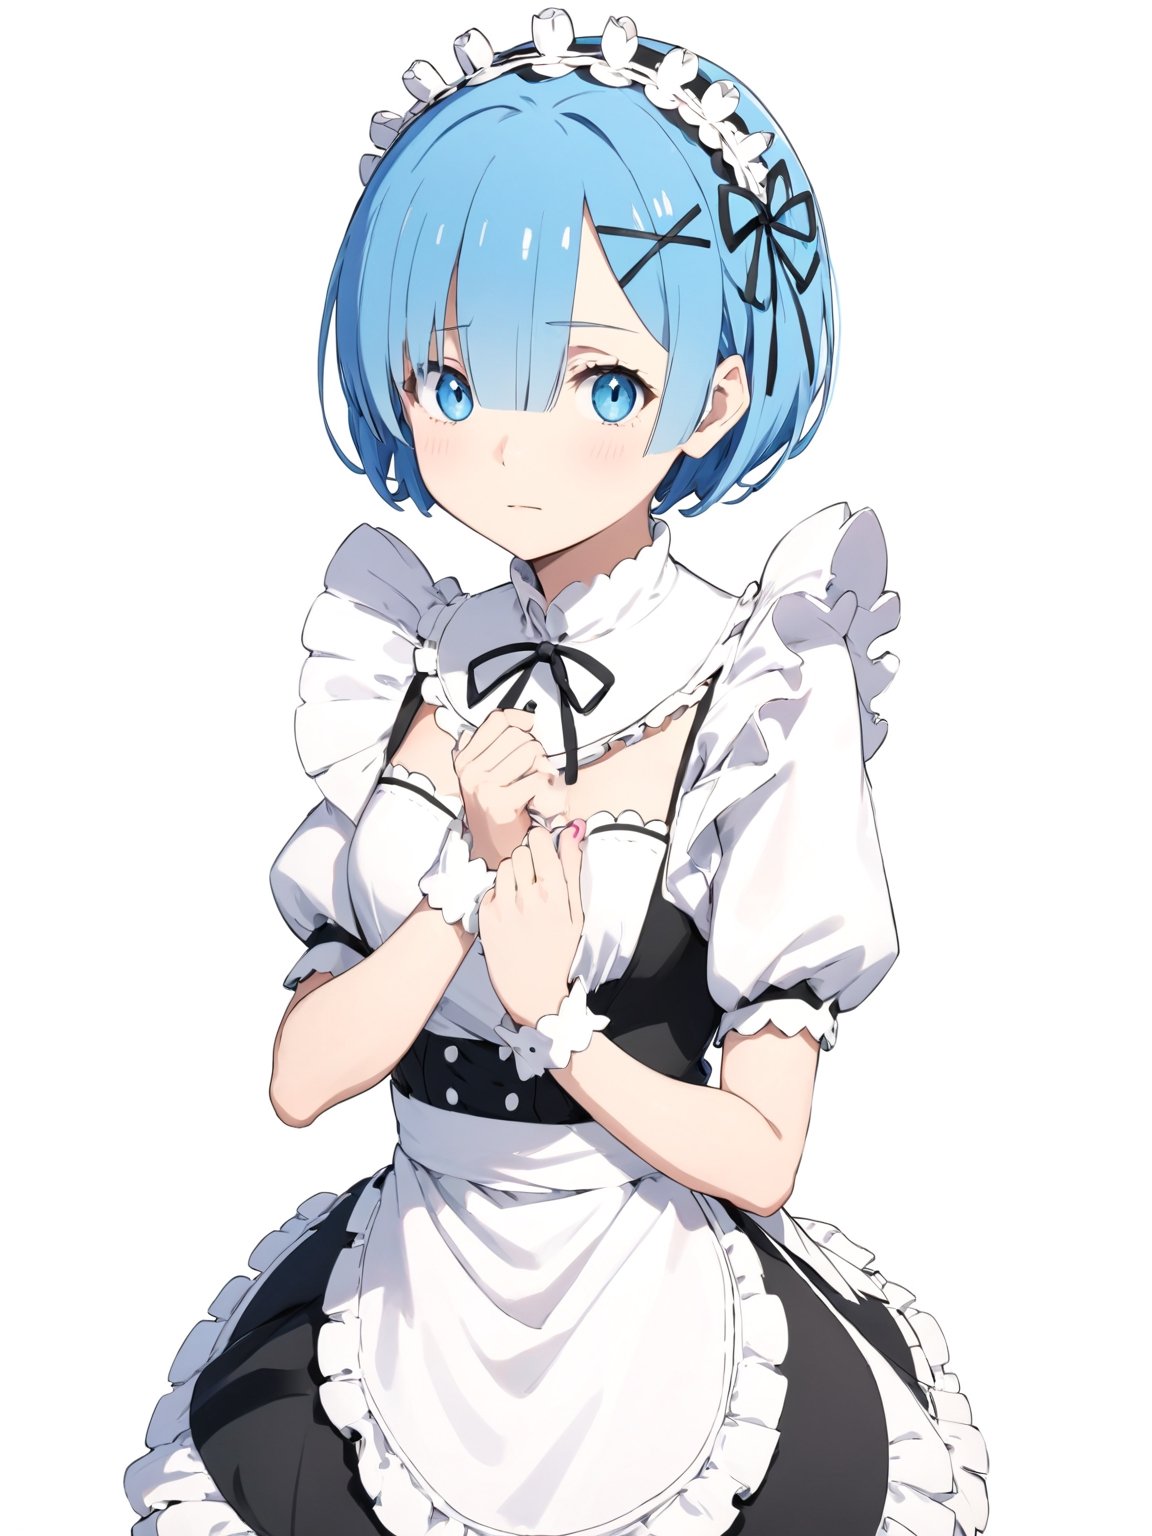 //Quality,
masterpiece, best quality, detailed
,//Character,
solo,rem \(re_zero\), 1girl, blue eyes, blue hair, short hair
,//Fashion,
roswaal mansion maid uniform, hair ribbon
,//Background,
white_background, simple_background
,//Others,
